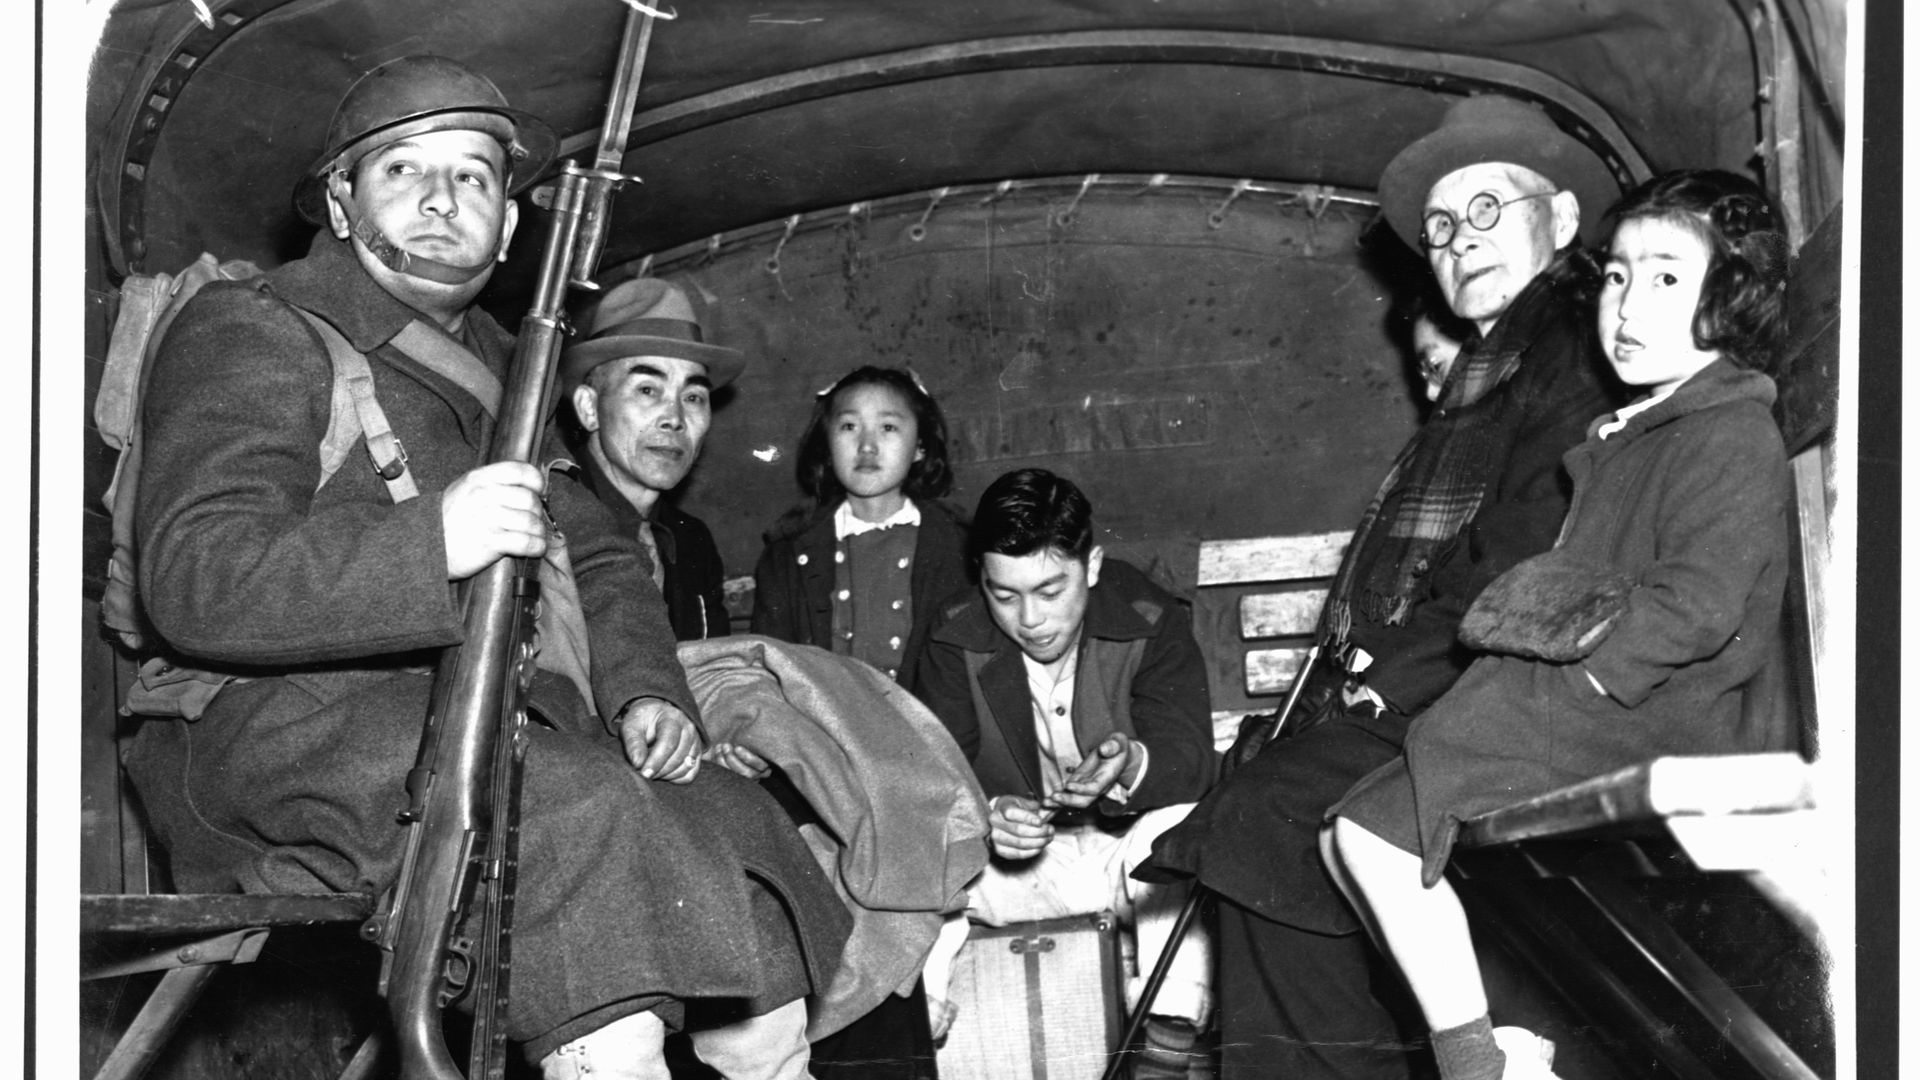 A soldier escorts several Japanese American children and a pastor in the back of a truck during their evacuation from Bainbridge Island to an internment center. 1942.